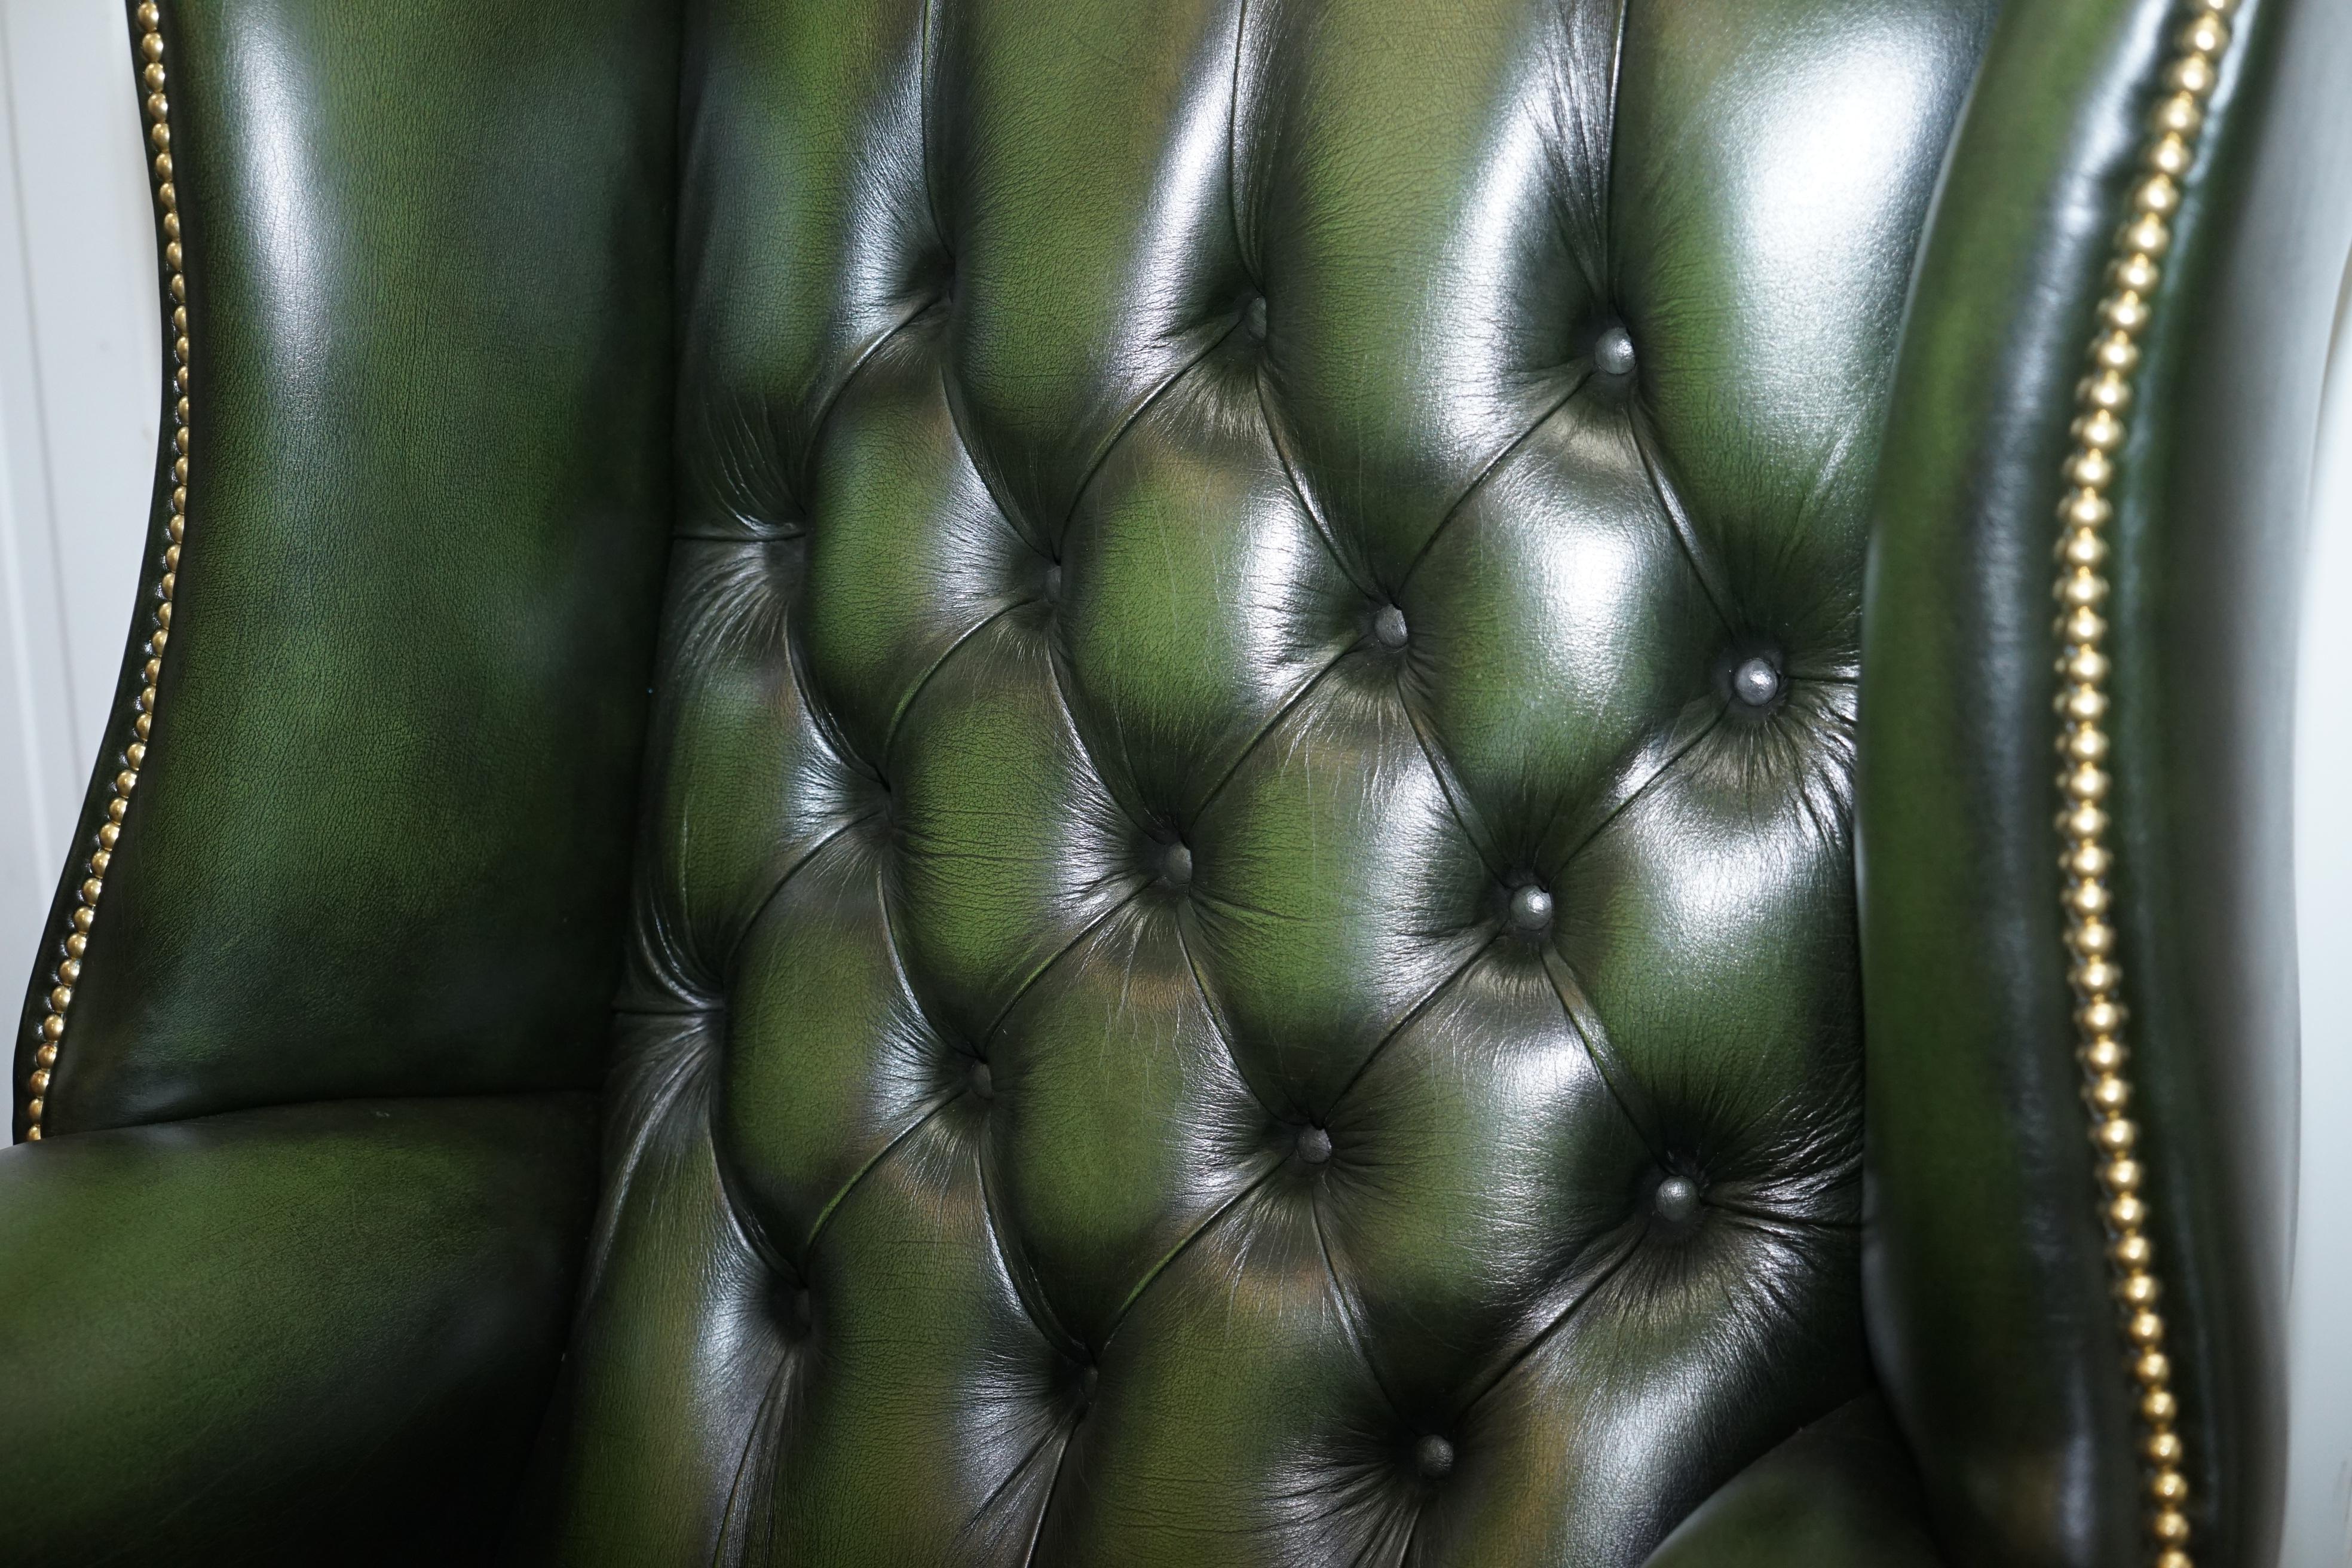 green leather chesterfield footstool